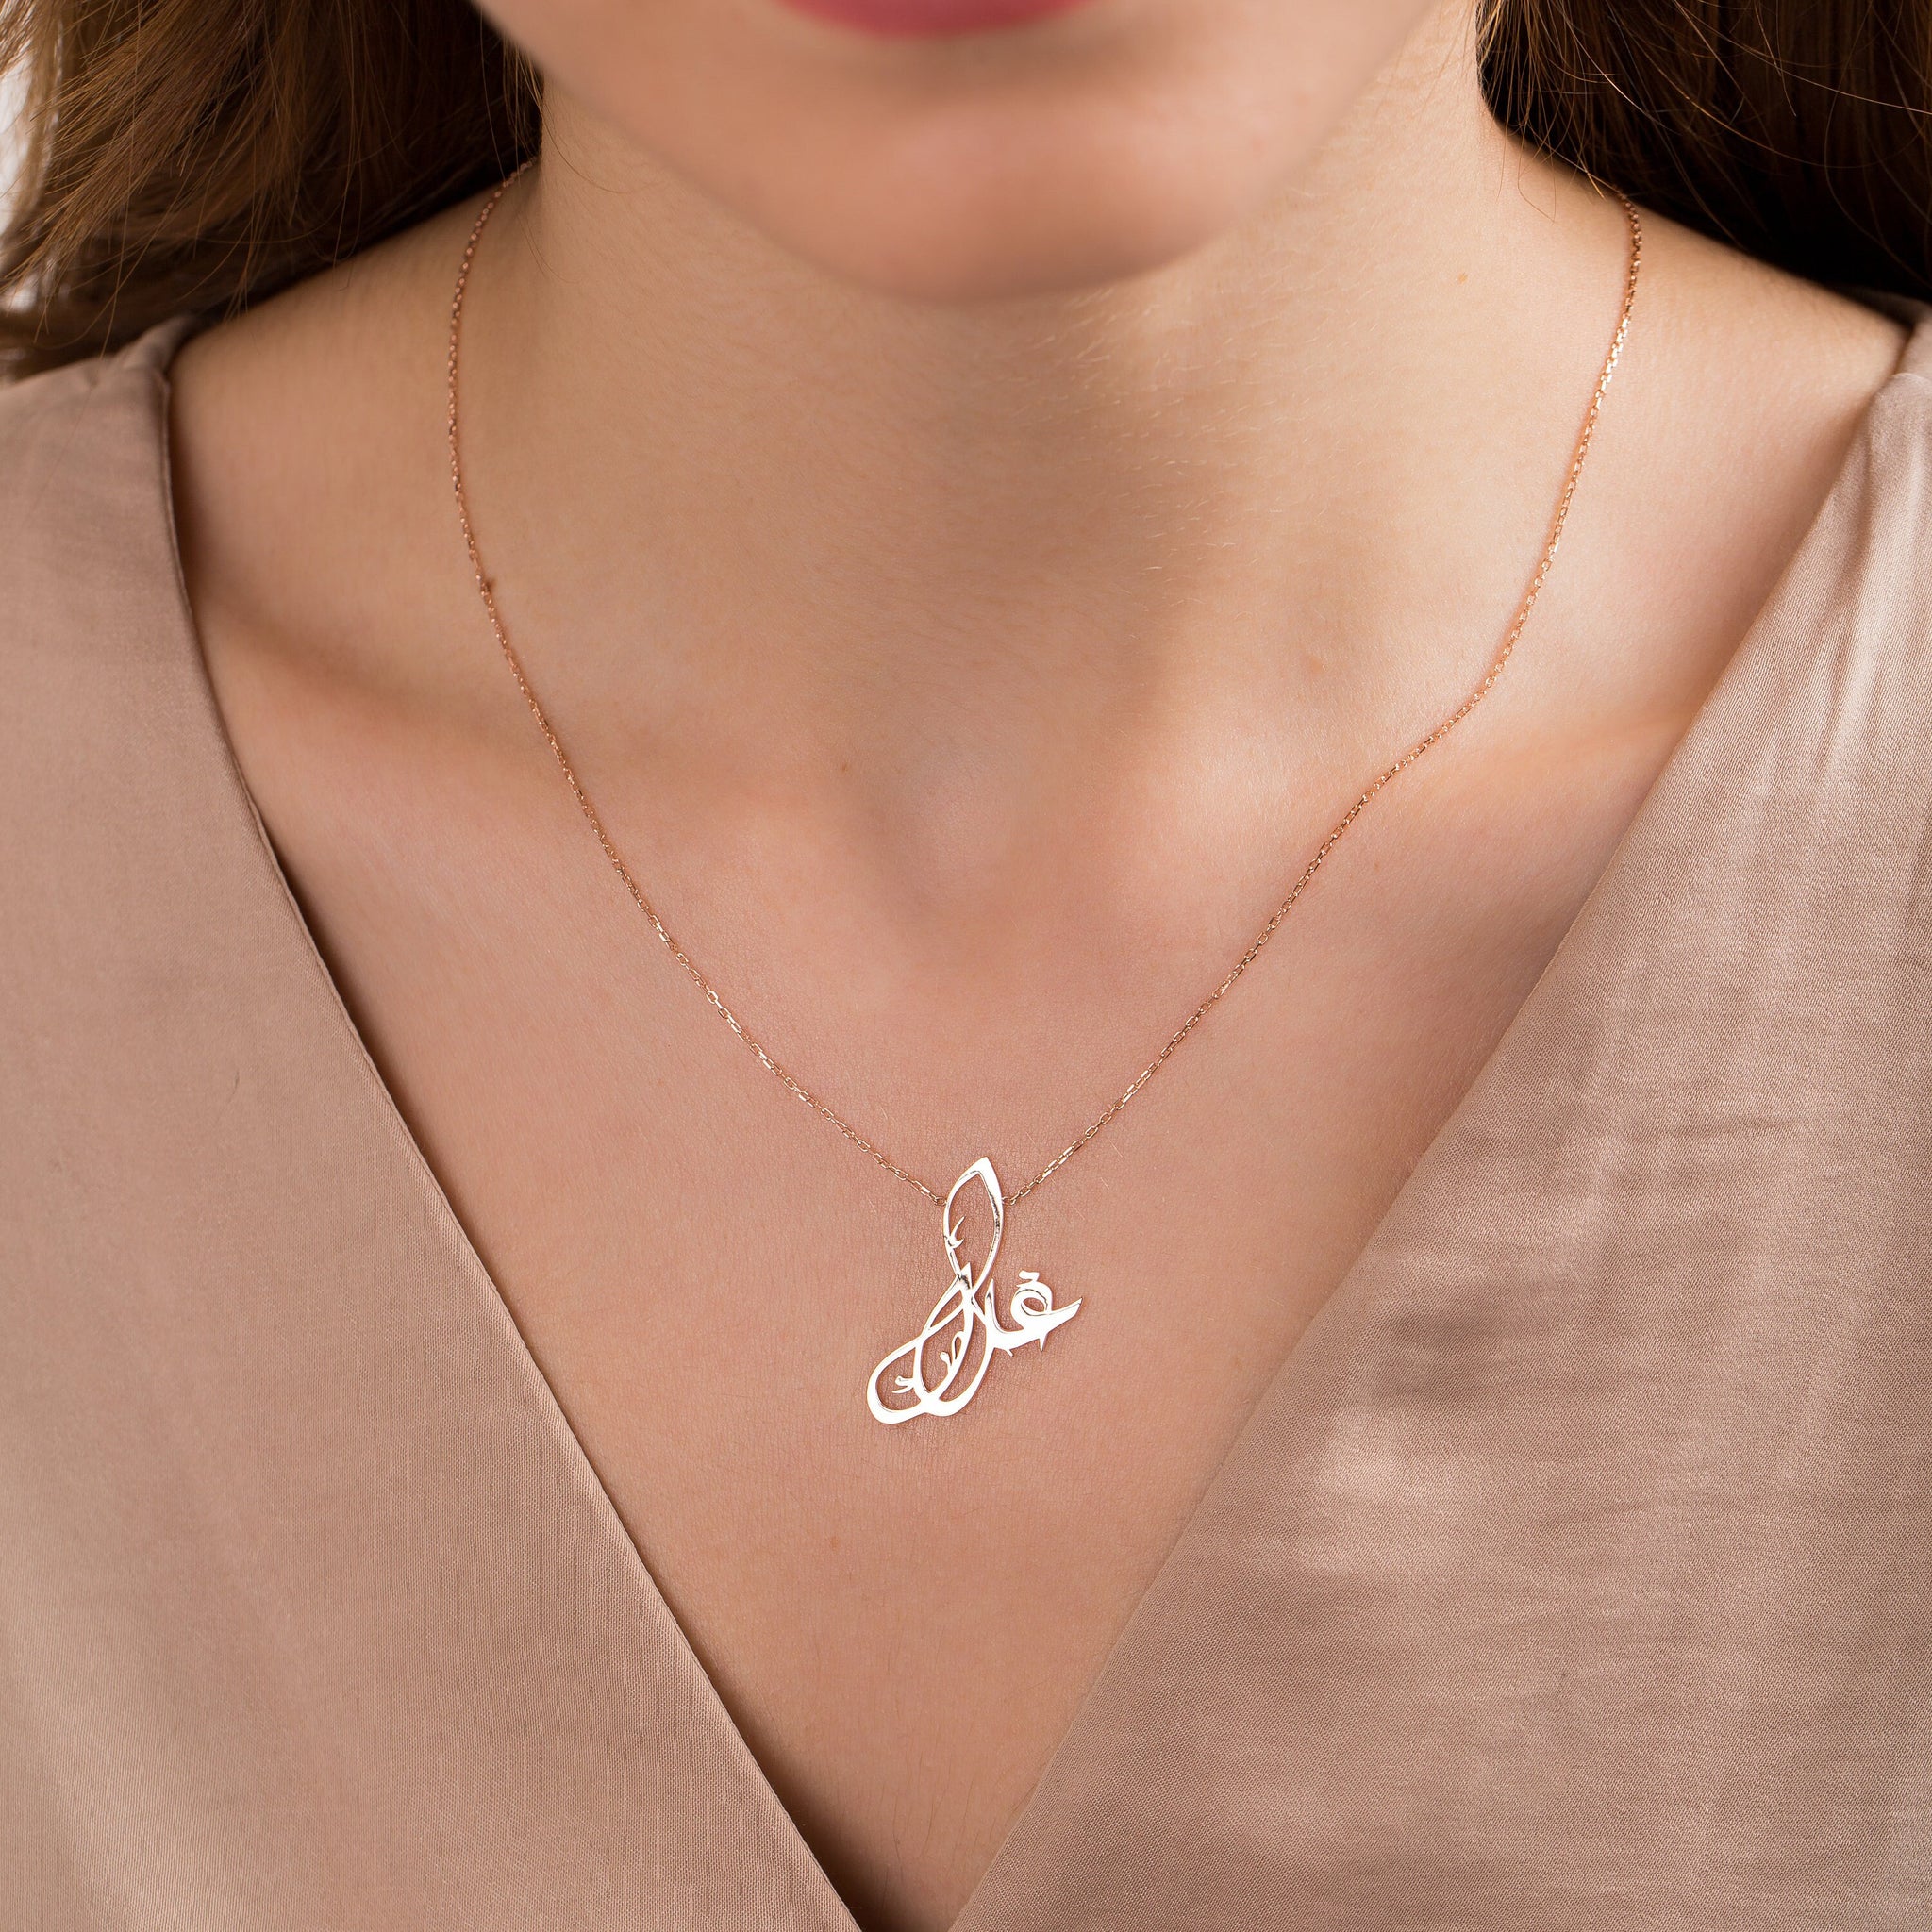 Buy Arabic Name Necklace Gold Personalized Online in India - Etsy